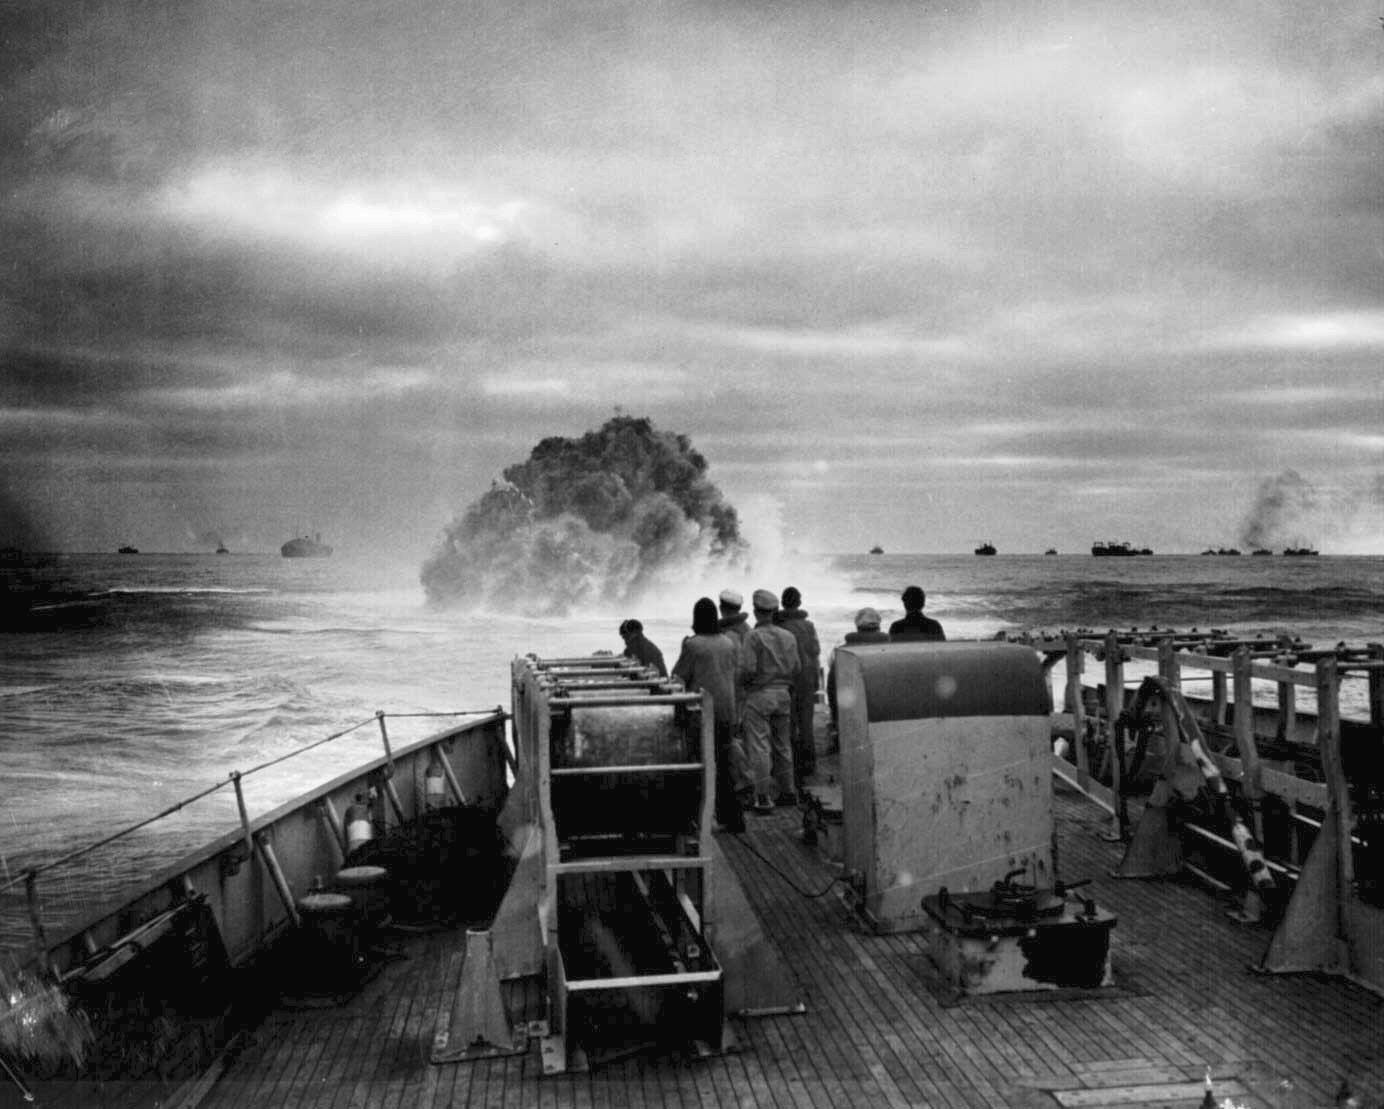 US Coast Guard crew of cutter Spencer watched as a depth charge exploded near U-175, North Atlantic, 500 nautical miles WSW of Ireland, 17 Apr 1943